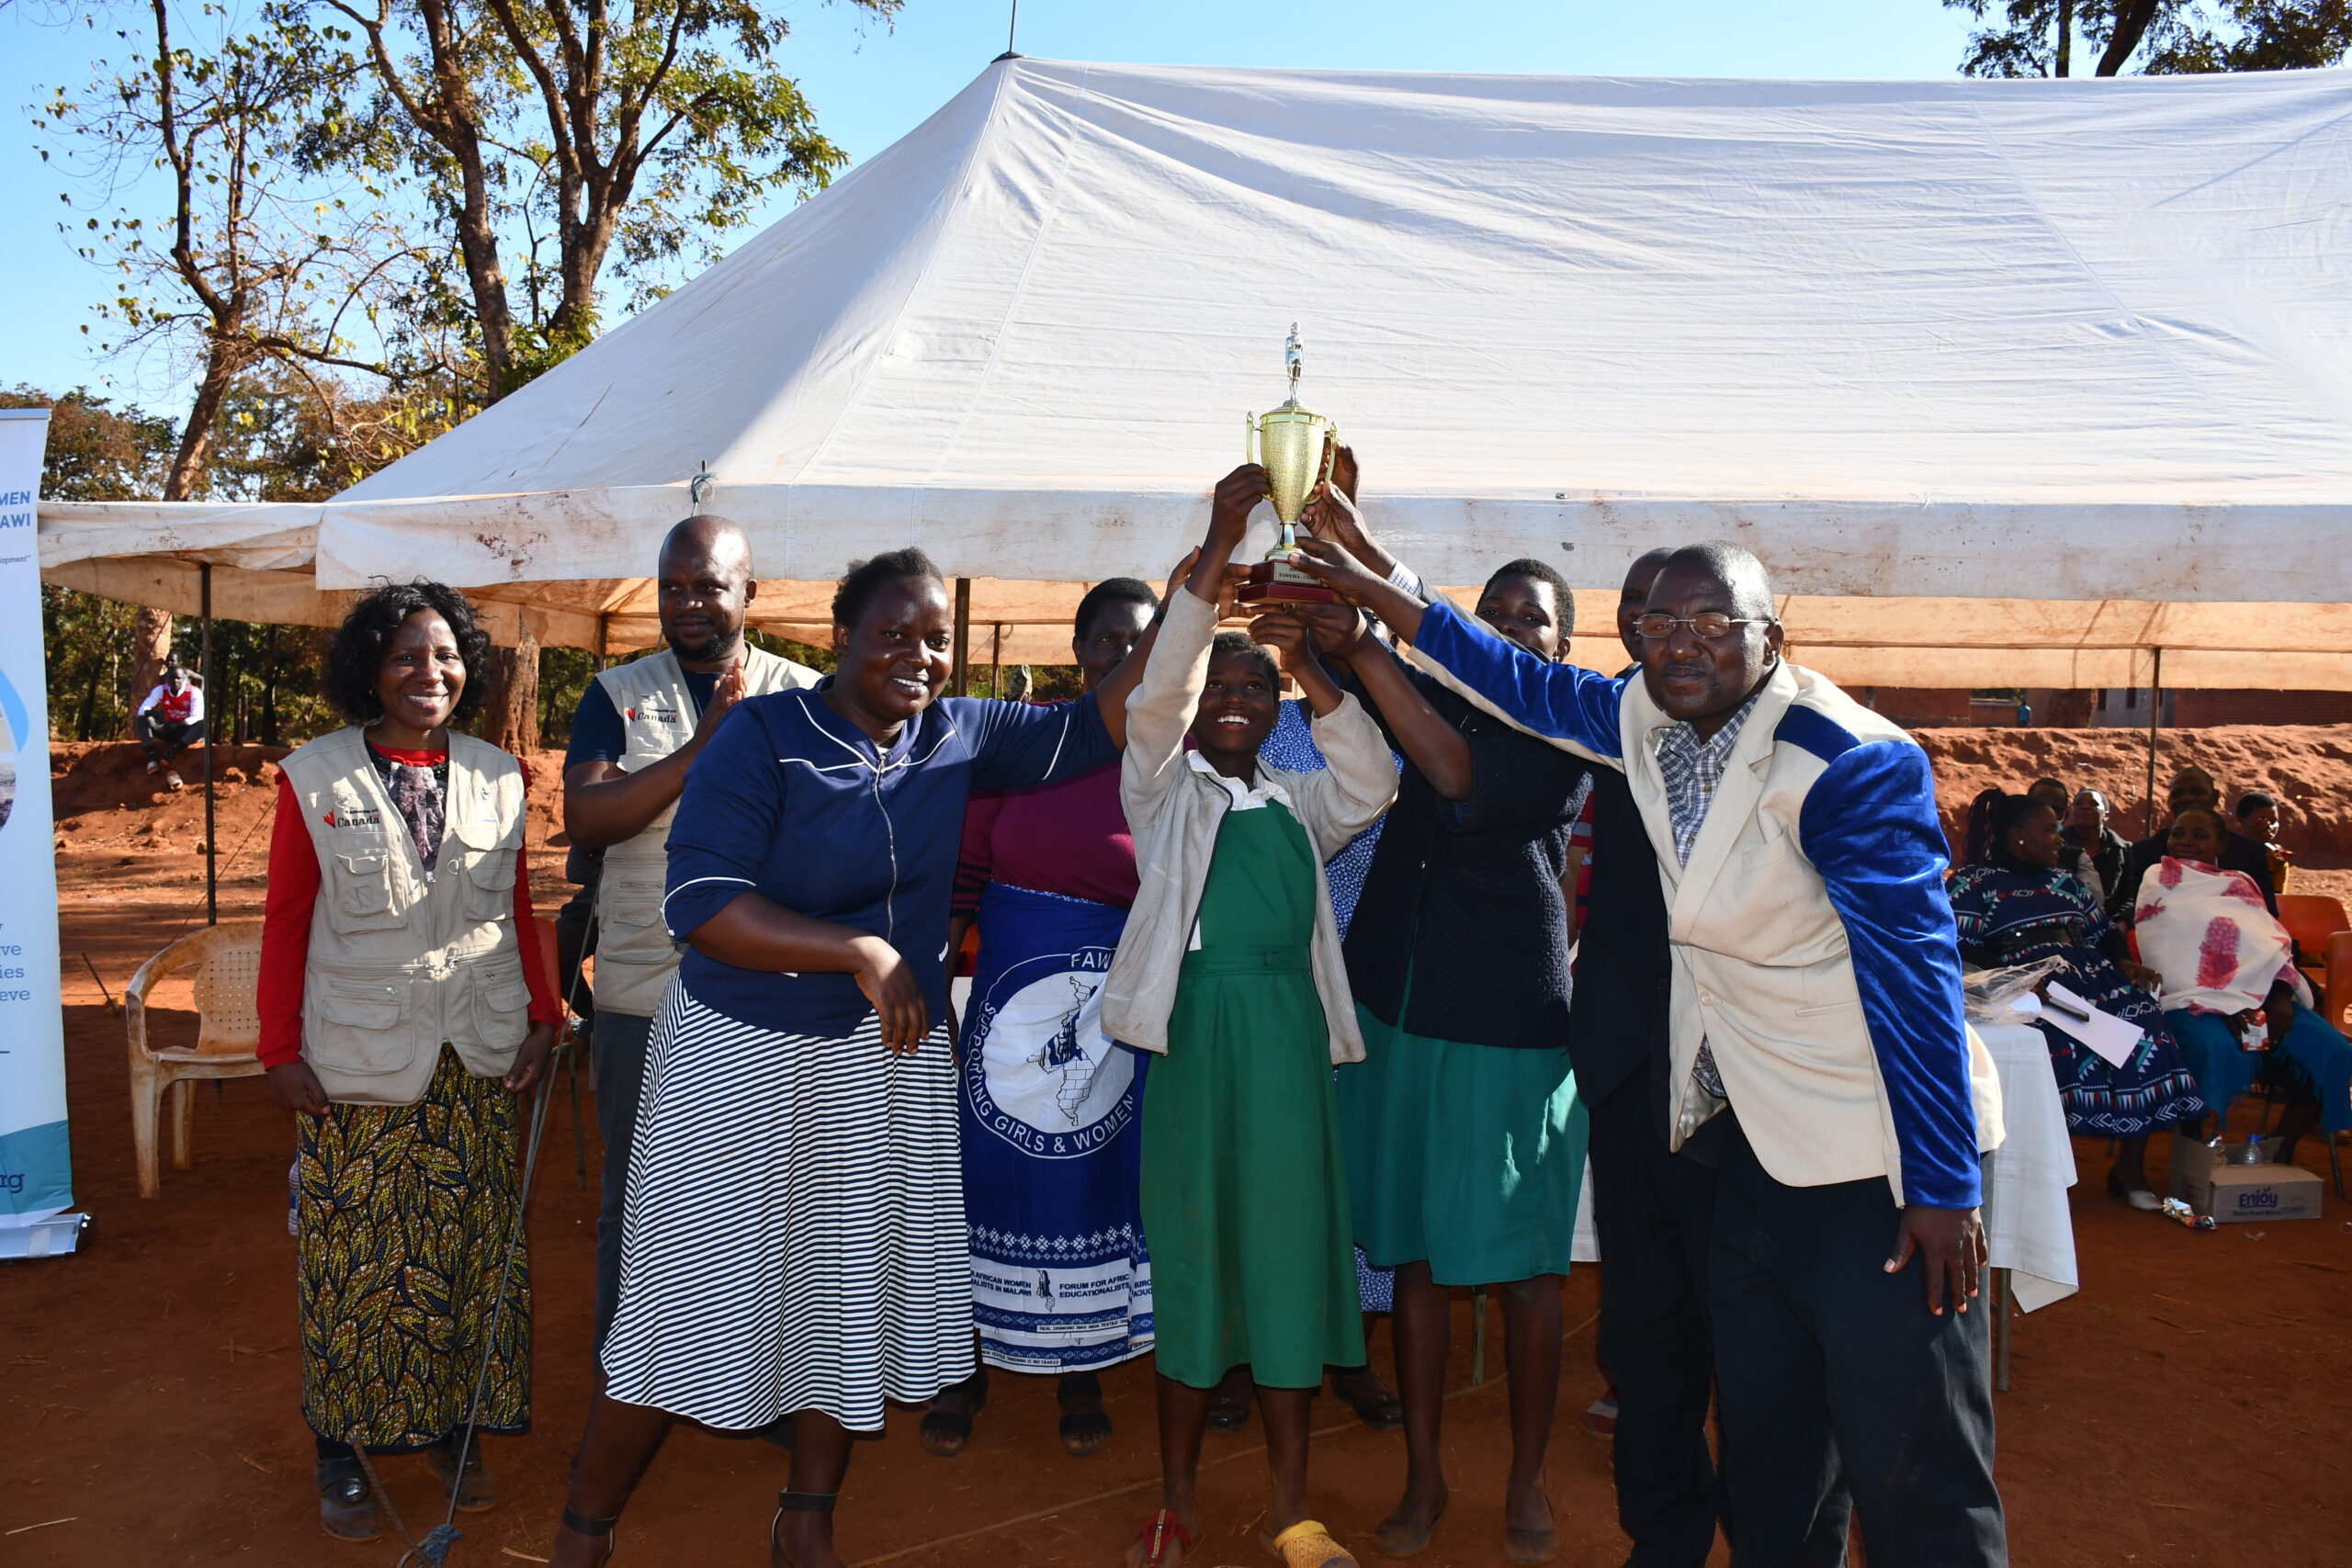 FAWEMA Competition Promotes Youth Empowerment, Awareness in Rural Malawian Schools